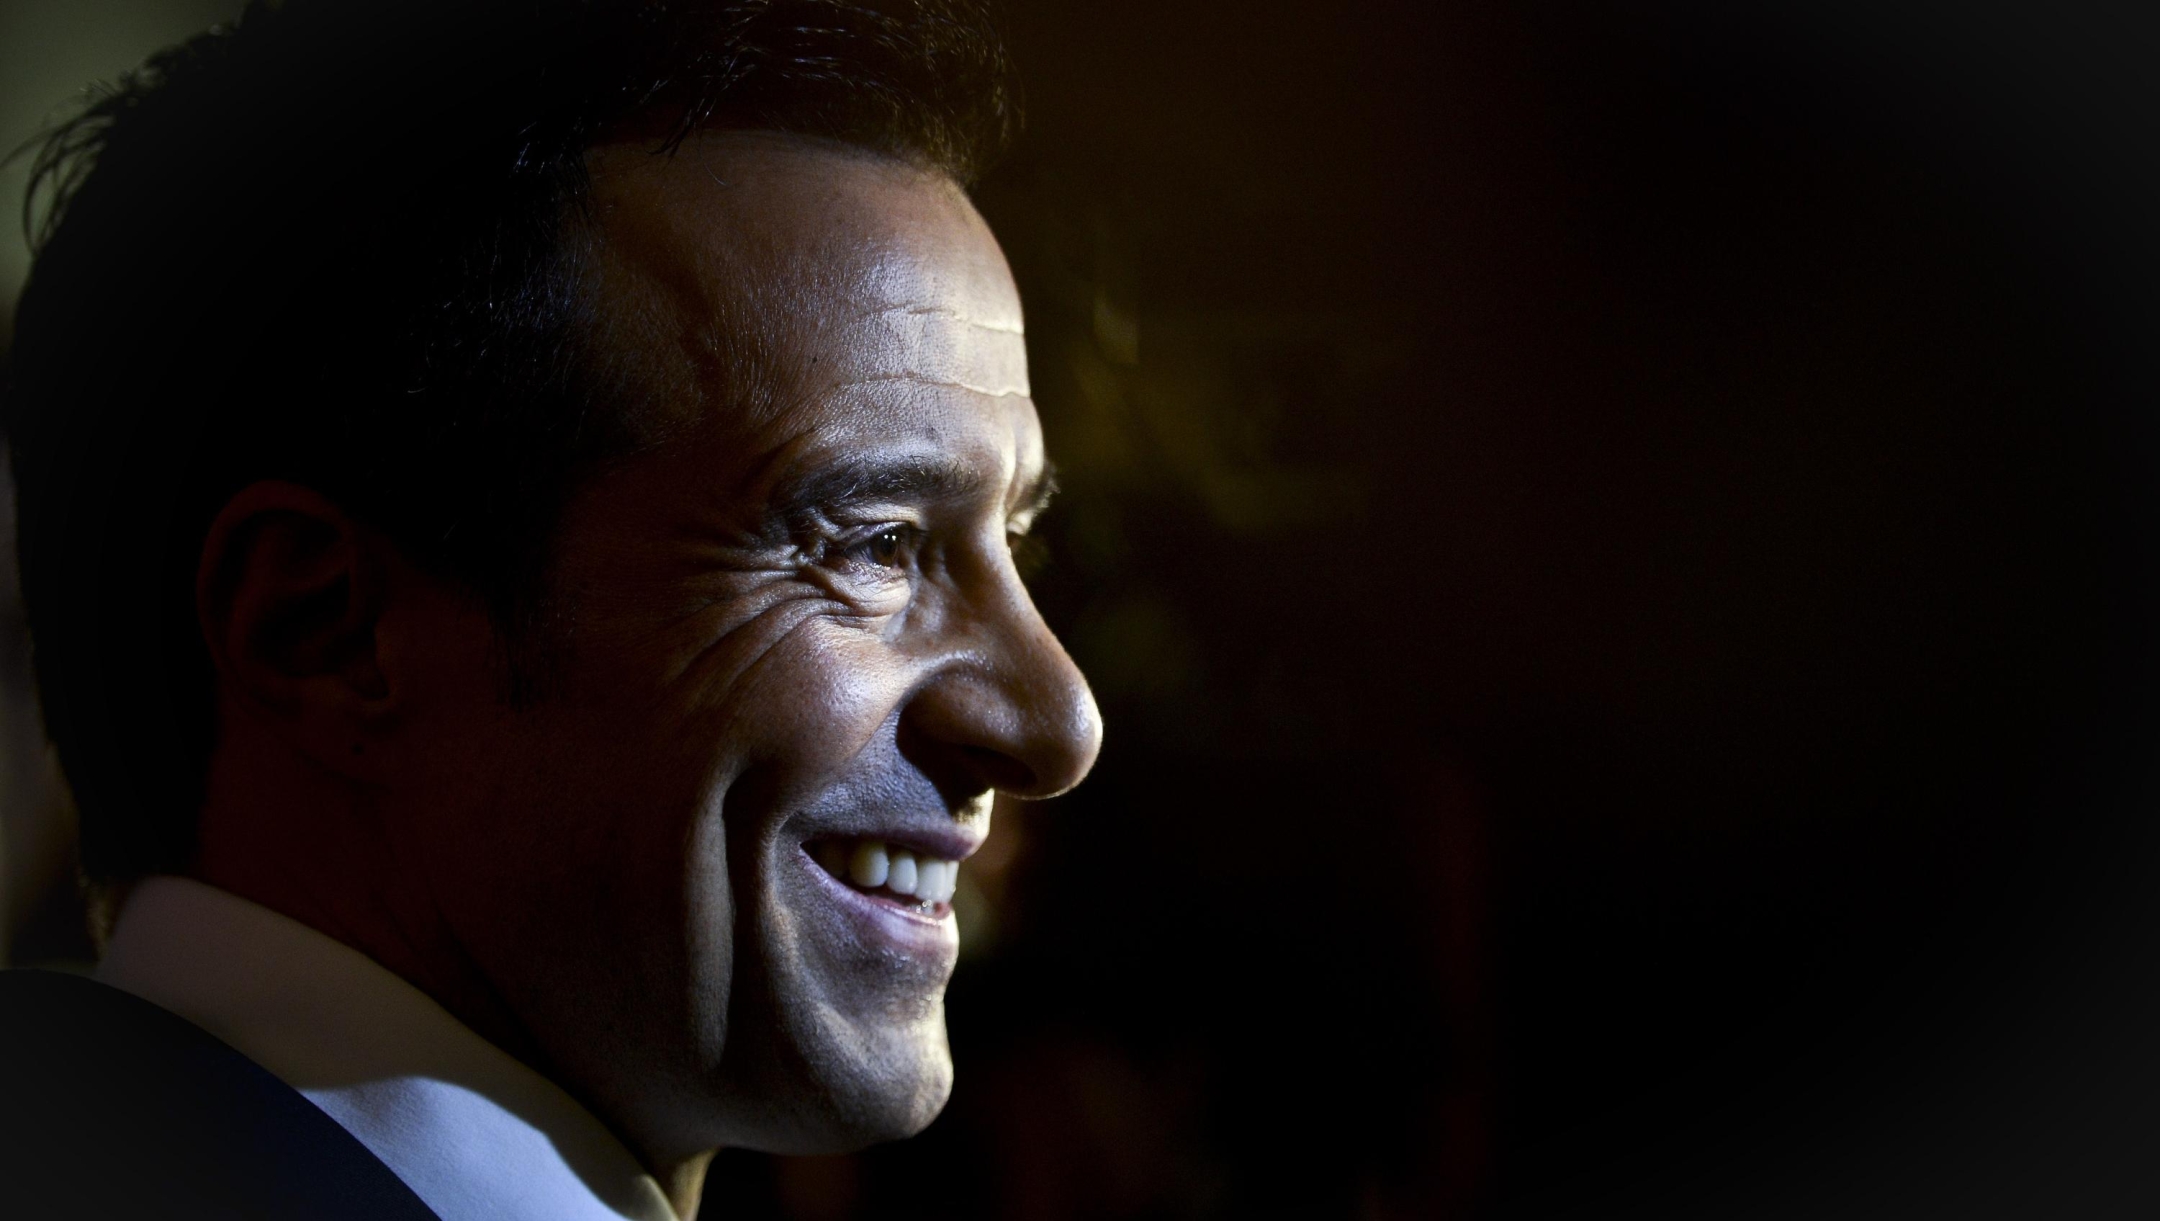 Portuguese football manager Jorge Mendes stands in front of the press during the release of the book "The Special Agent" written by Miguel Cuesta and Jonathan Sanchez in Lisbon on February 2, 2015. AFP PHOTO/ PATRICIA DE MELO MOREIRA